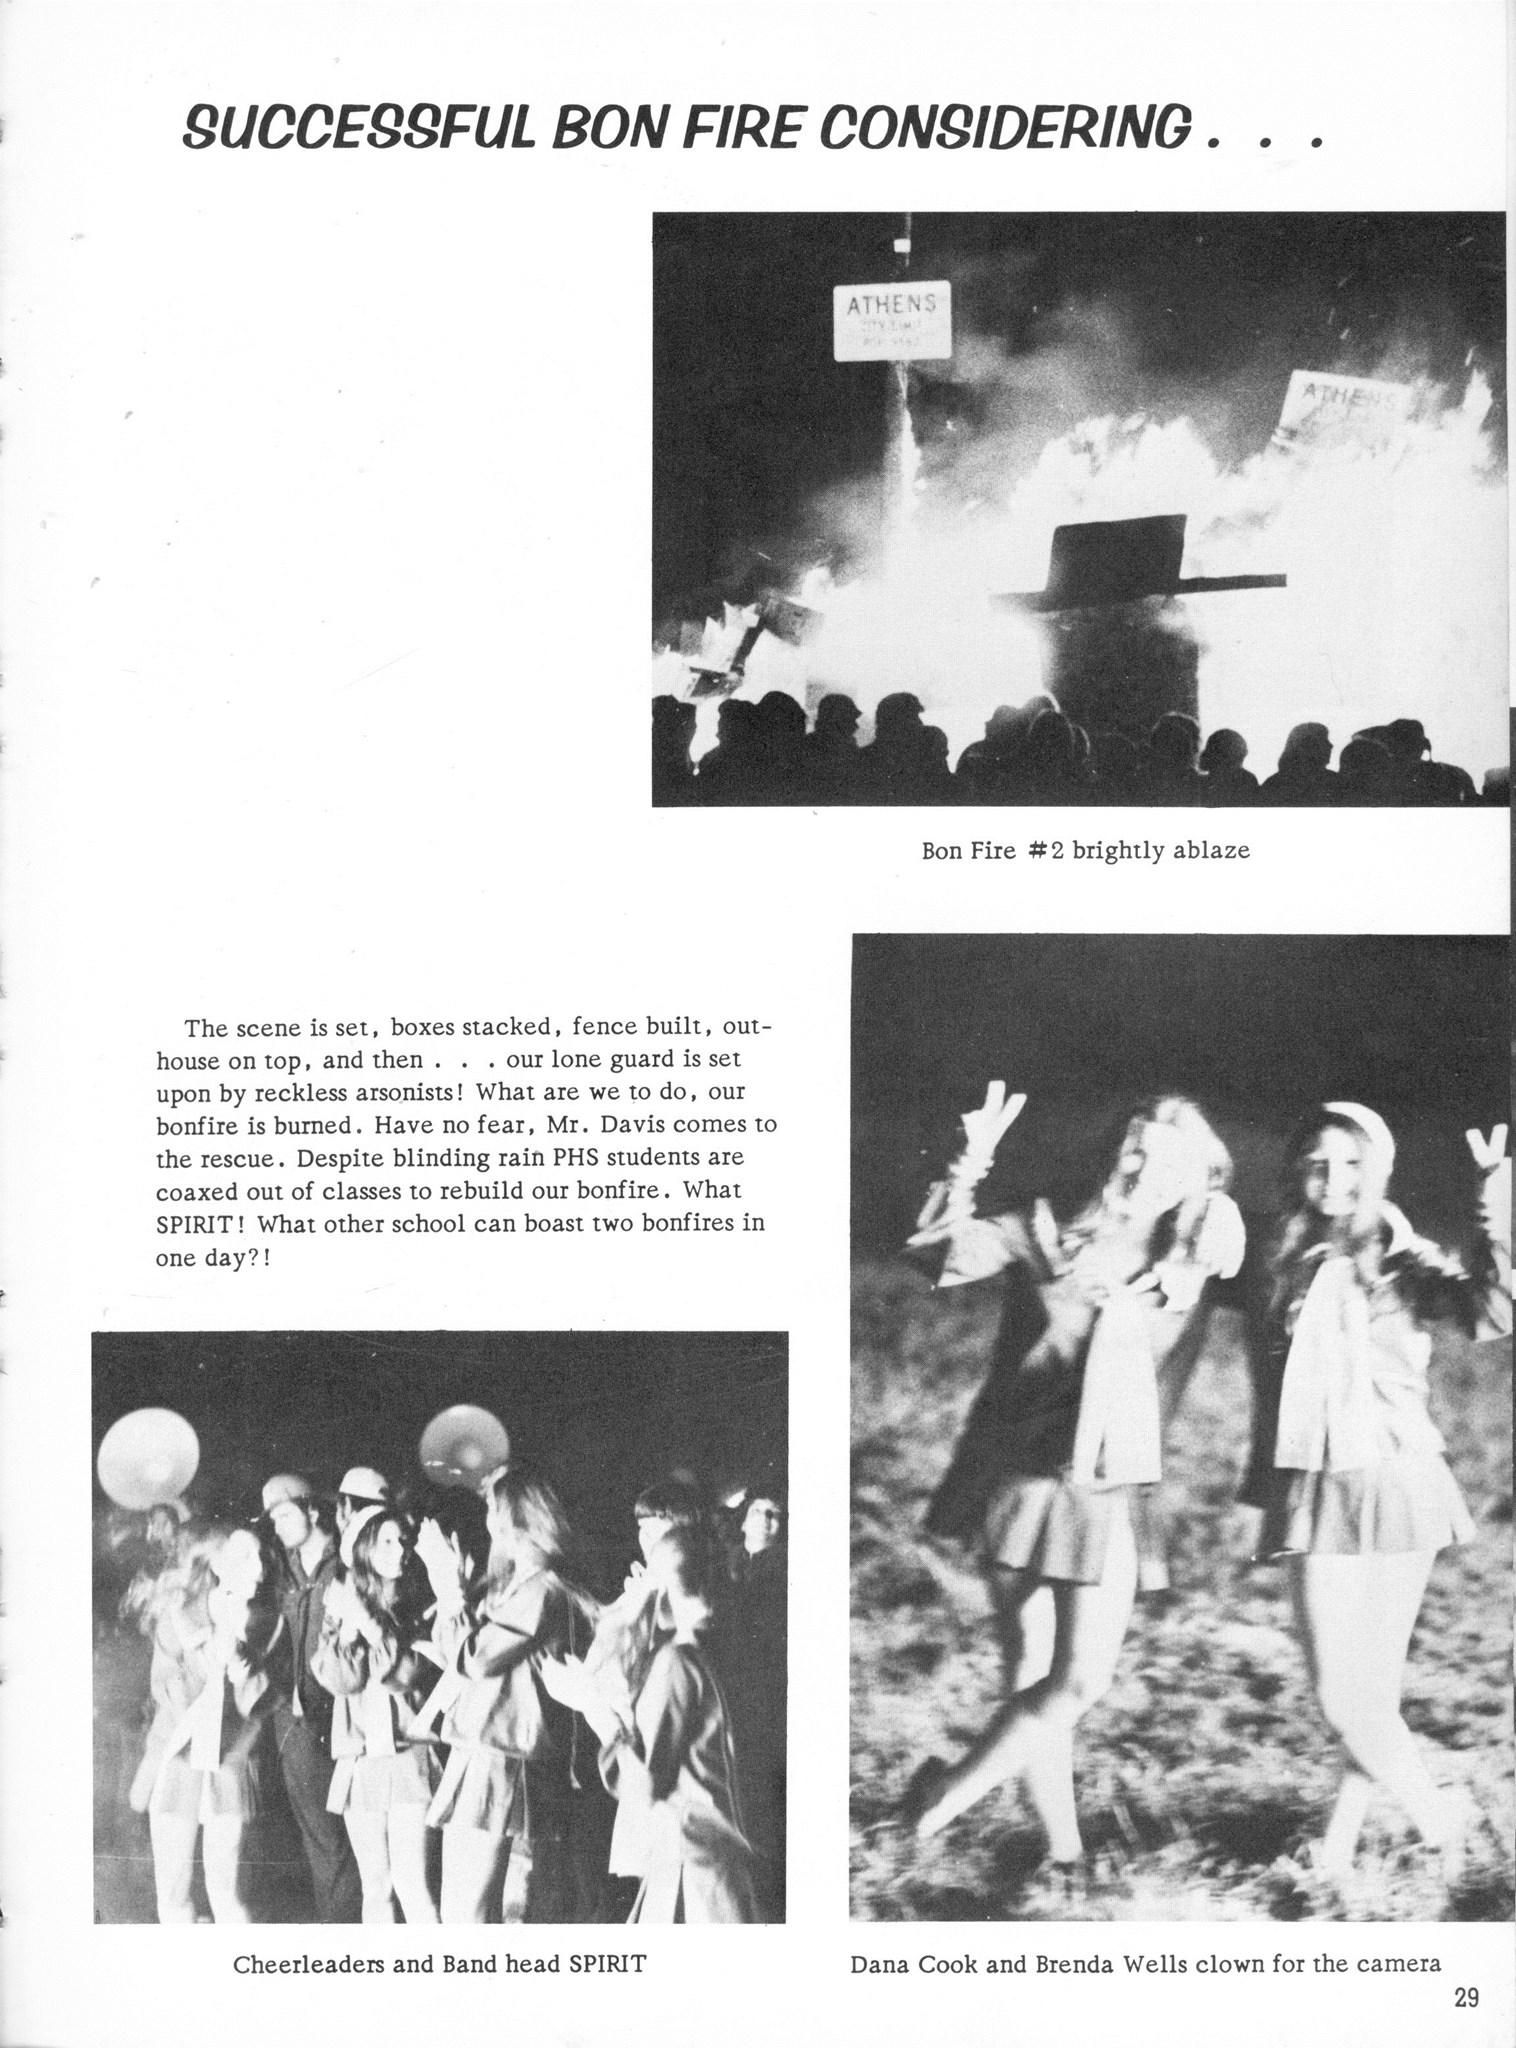 ../../../Images/Large/1975/Arclight-1975-pg0029.jpg